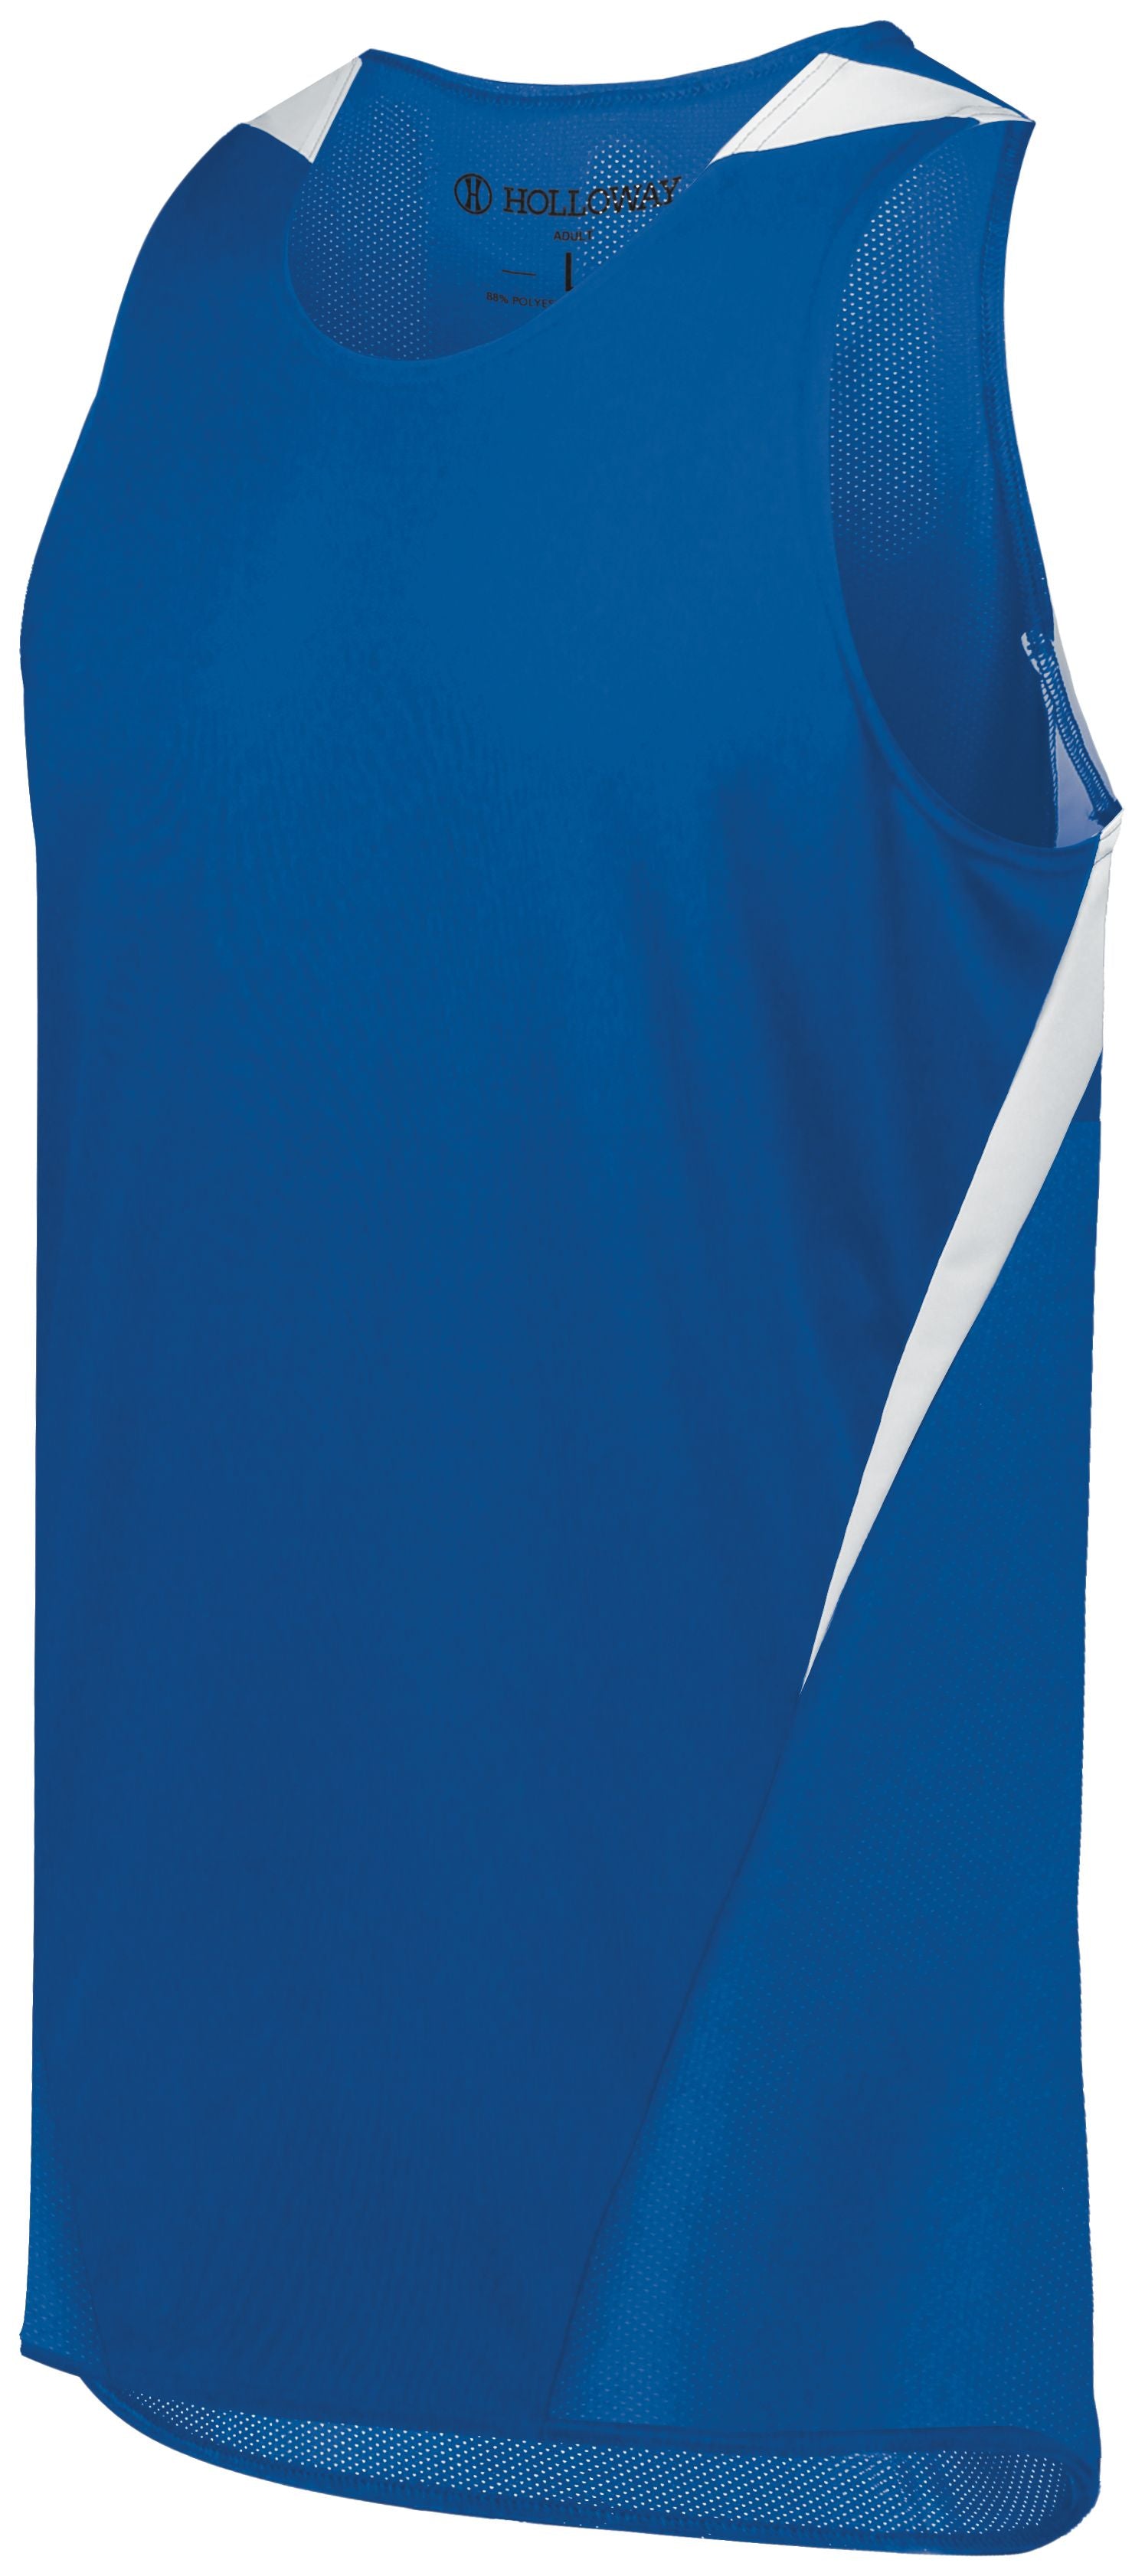 Holloway Pr Max Track Jersey in Royal/White  -Part of the Adult, Adult-Jersey, Track-Field, Holloway, Shirts product lines at KanaleyCreations.com